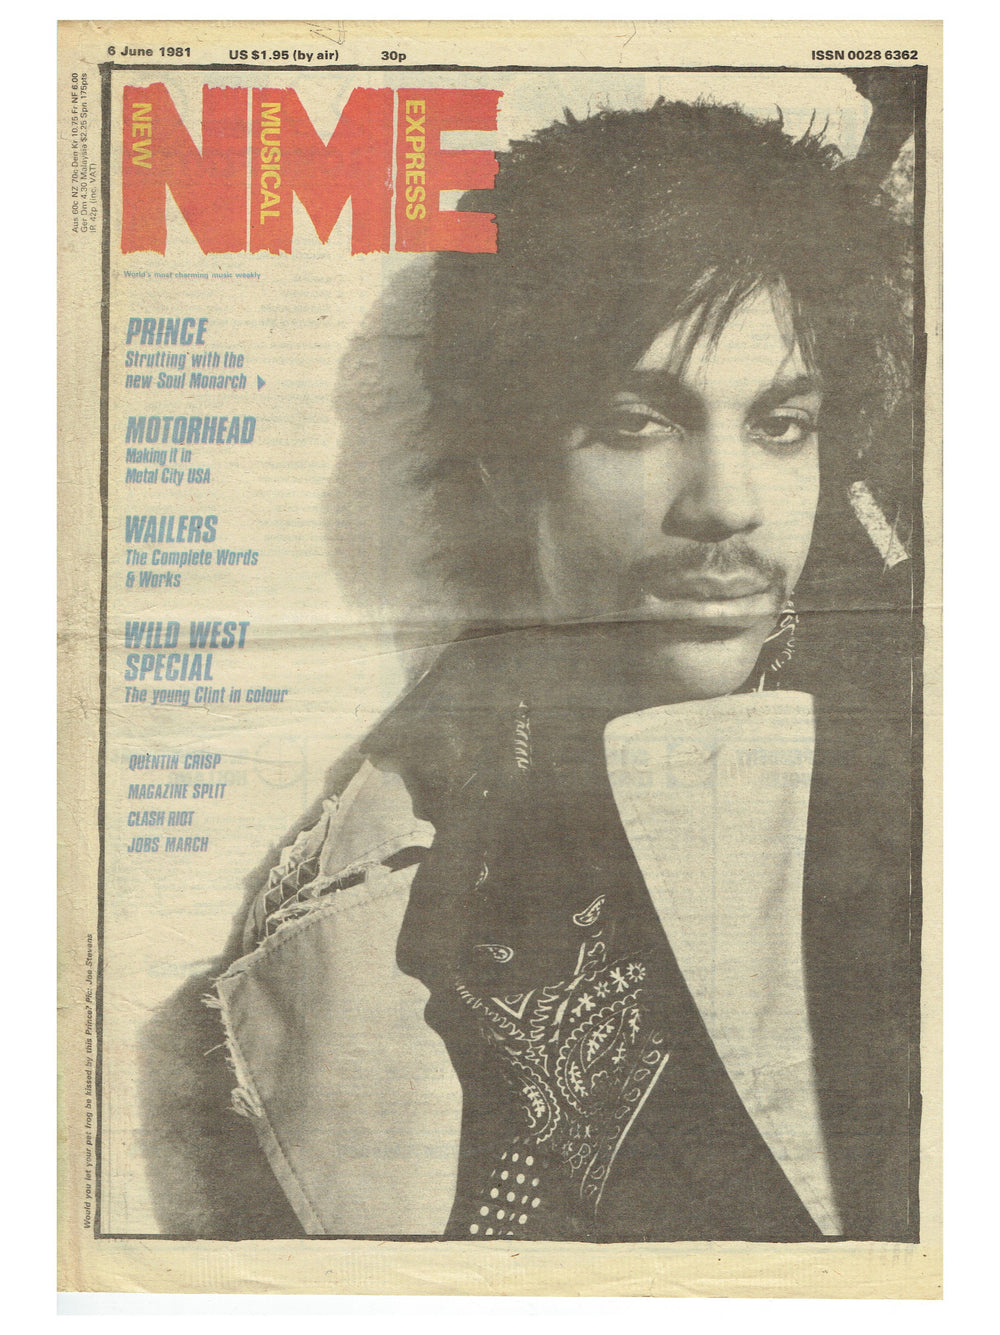 Prince – Strutting Full Page Cover Newspaper NME June 1st 1981